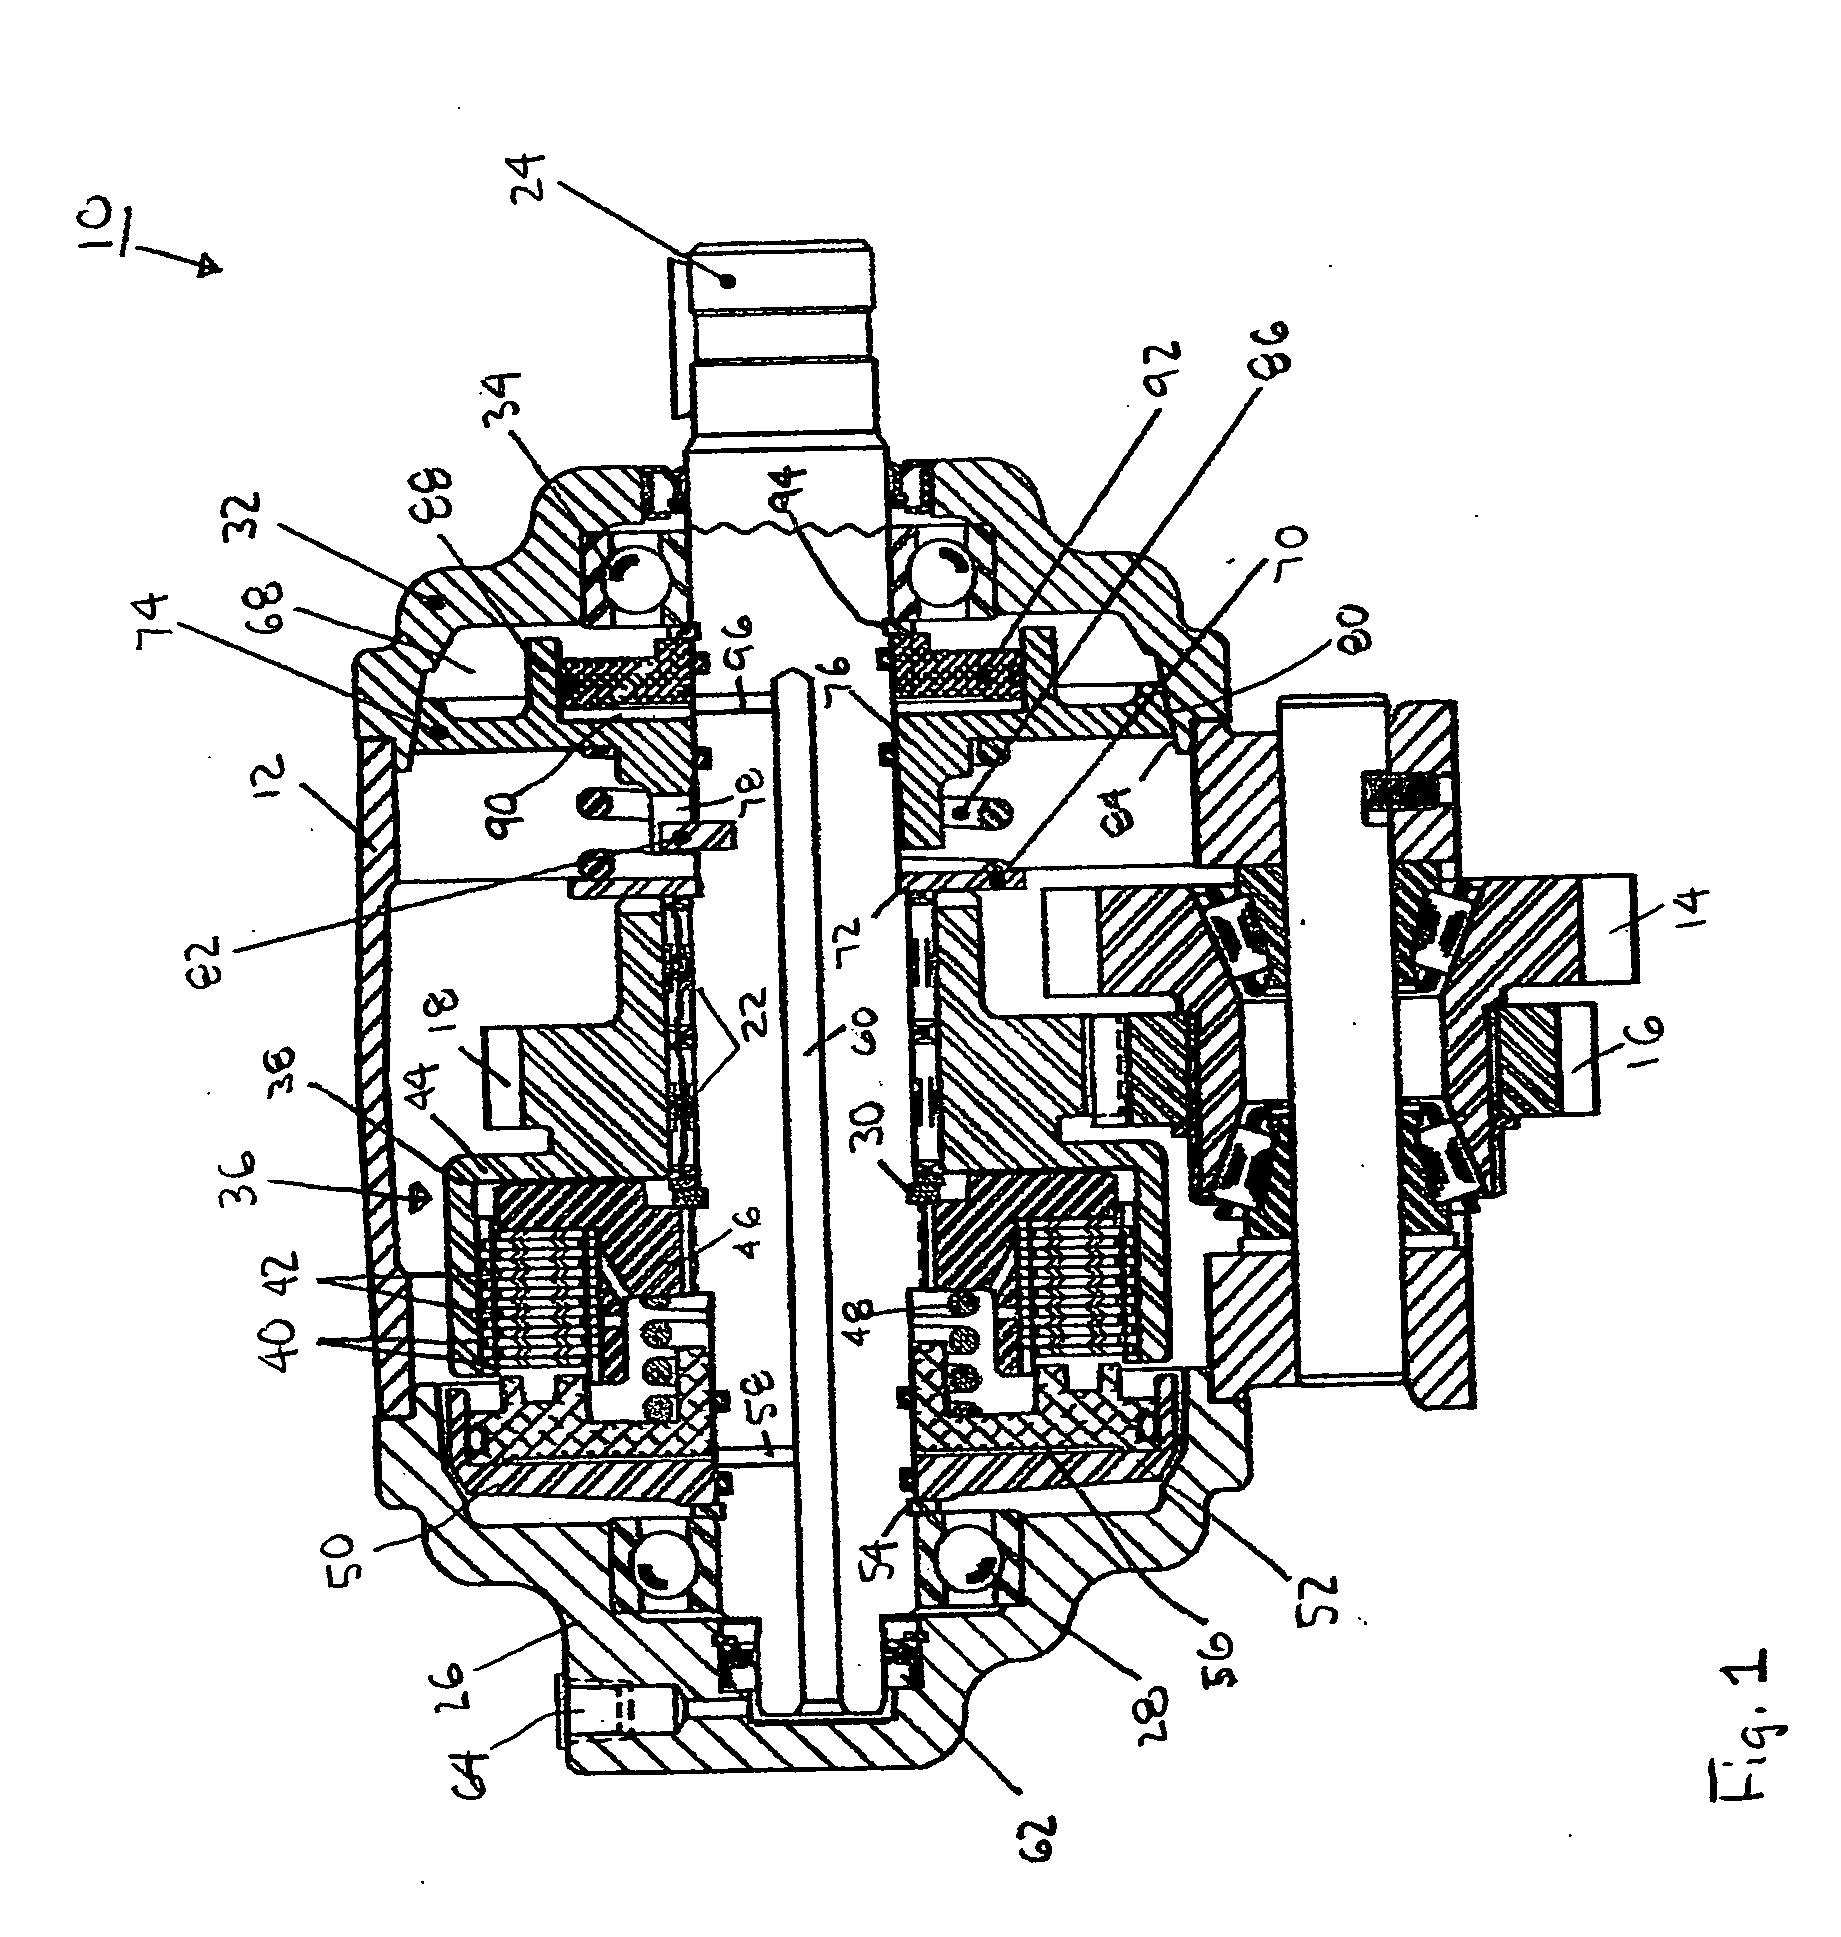 Automatic drag brake for a power take-off unit output shaft